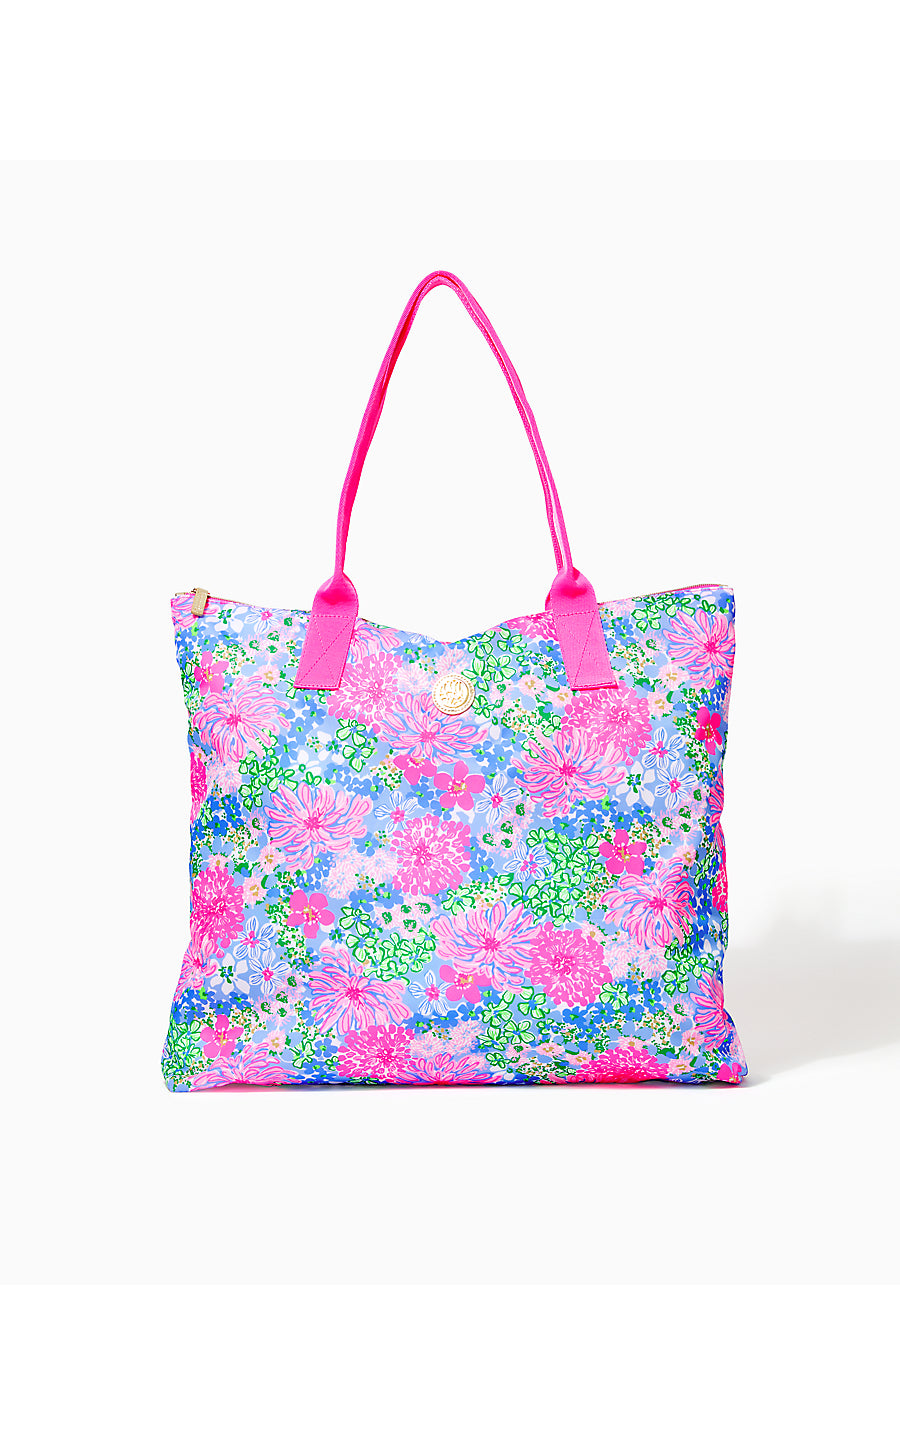 PIPER PACKABLE TOTE - LIL SOIREE ALL DAY